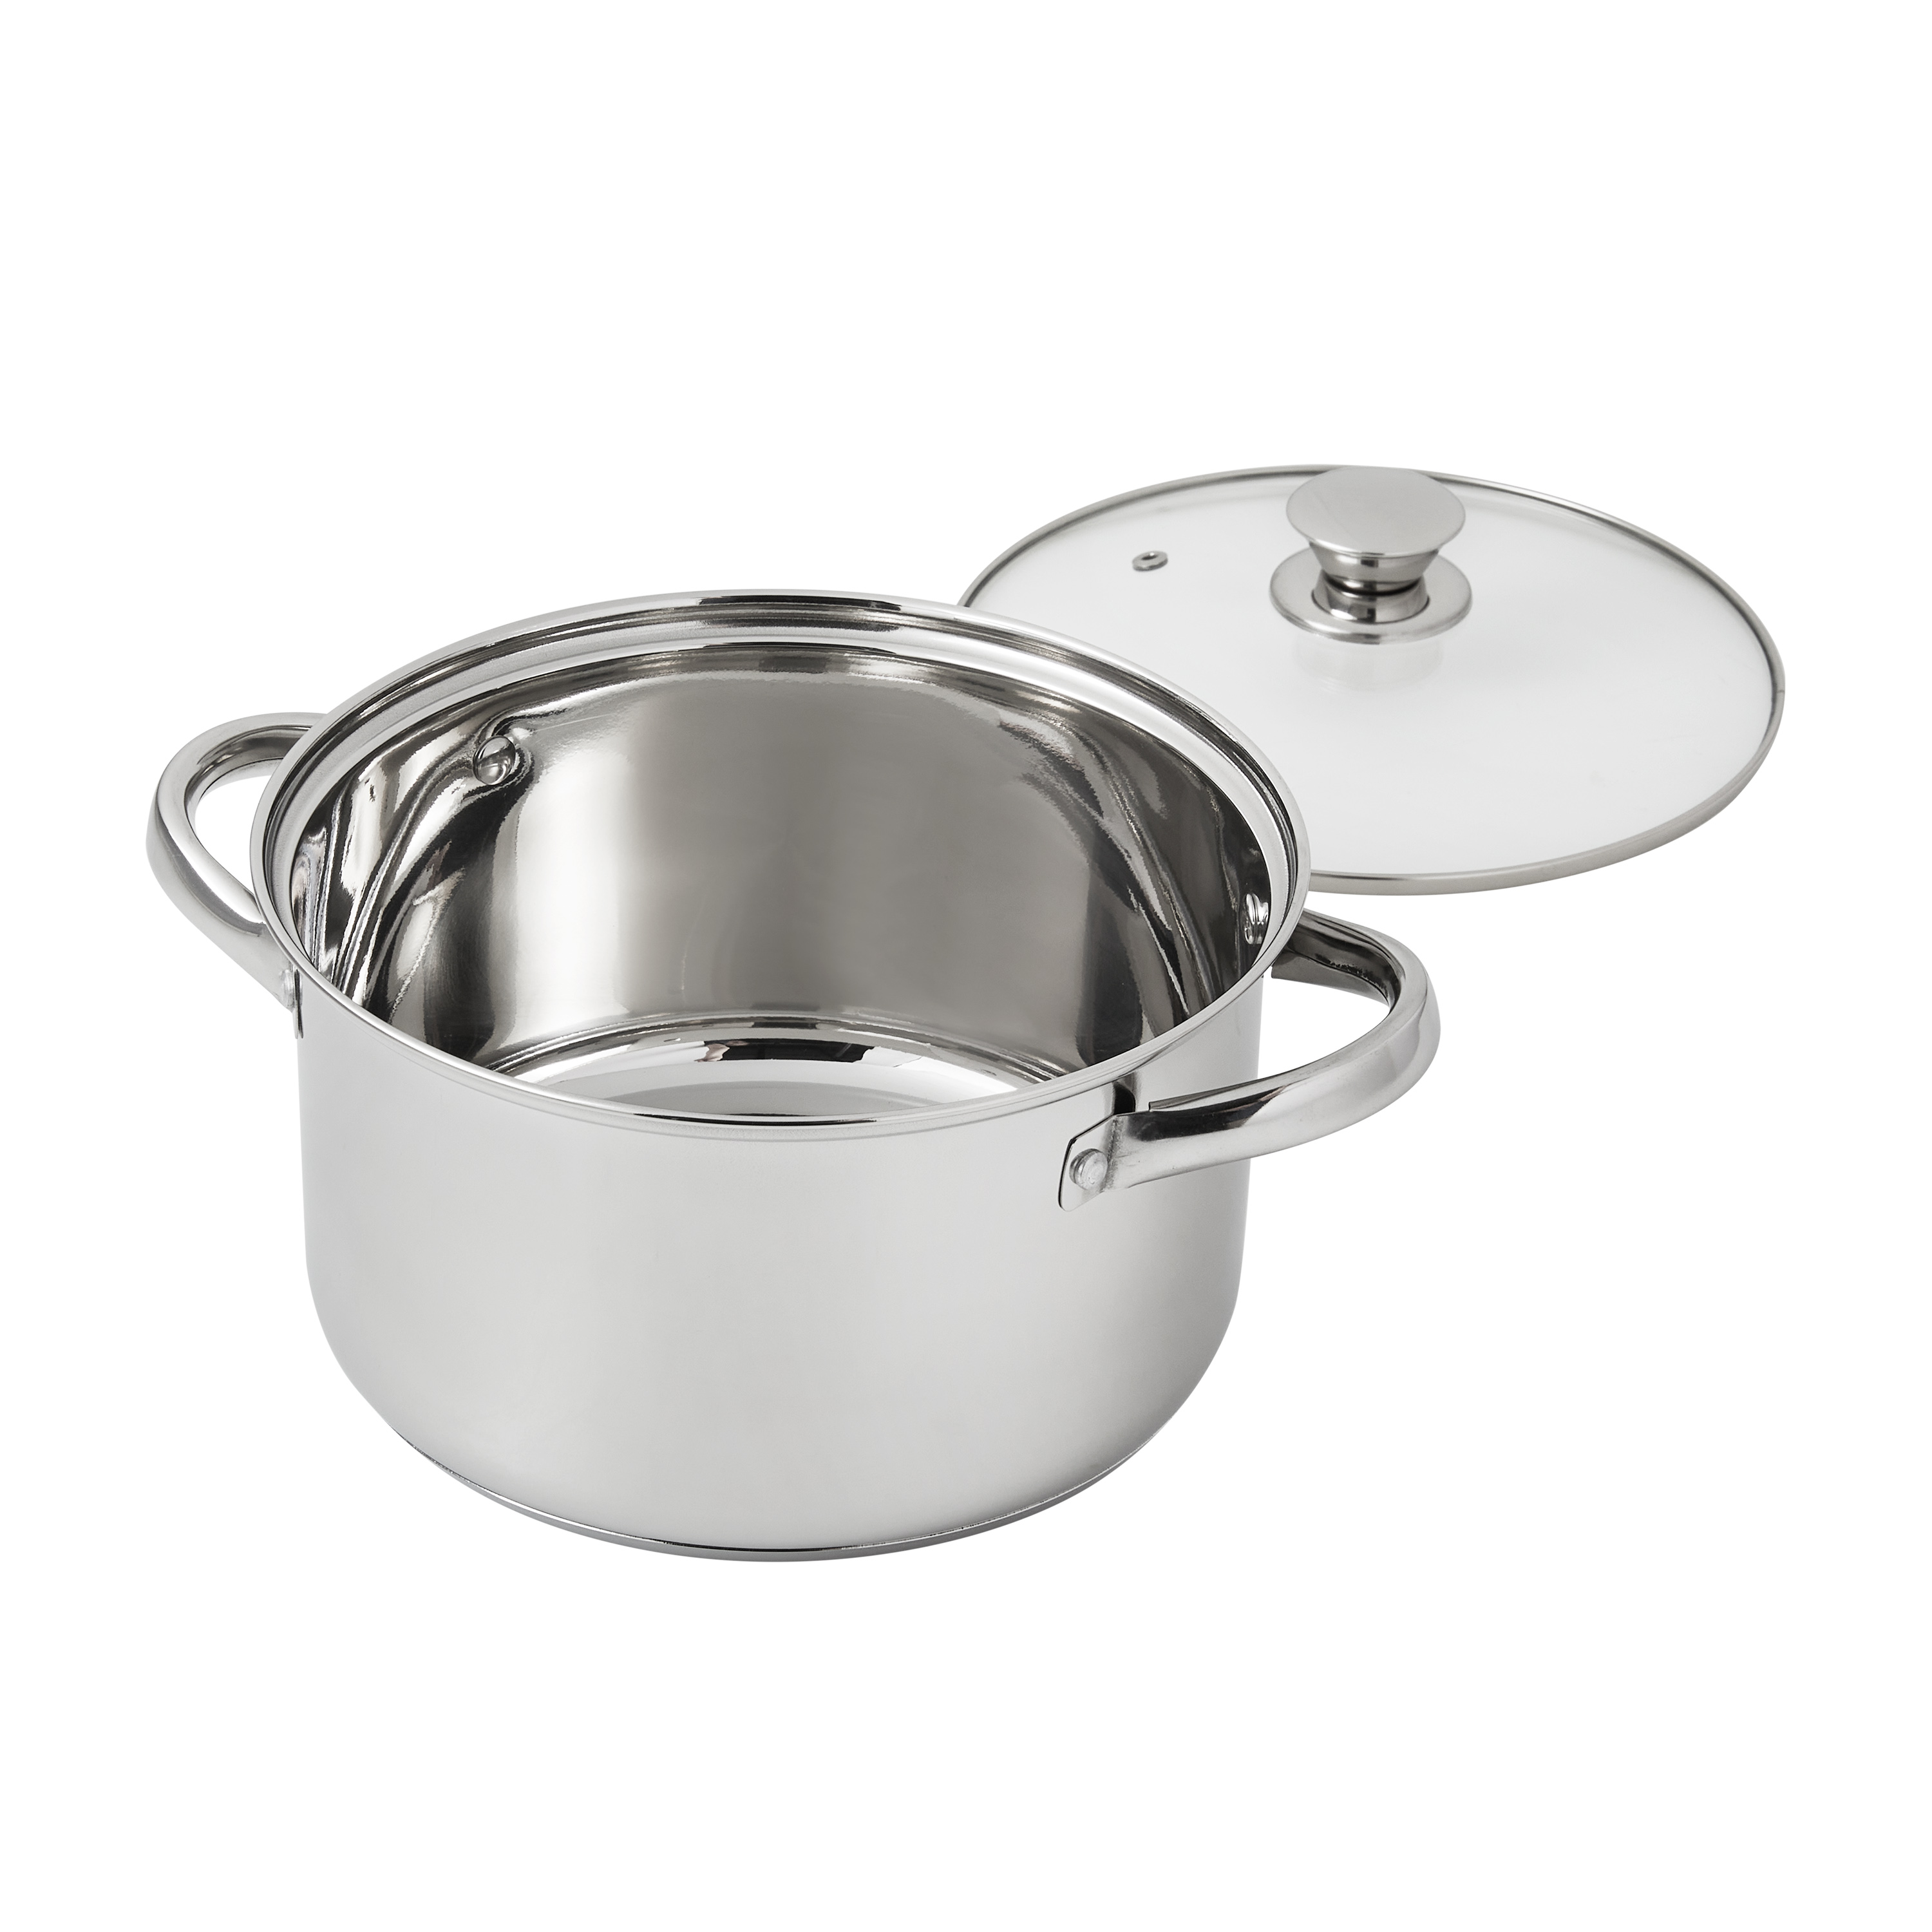 Mainstays Stainless Steel 10-Piece Cookware Set - image 4 of 8